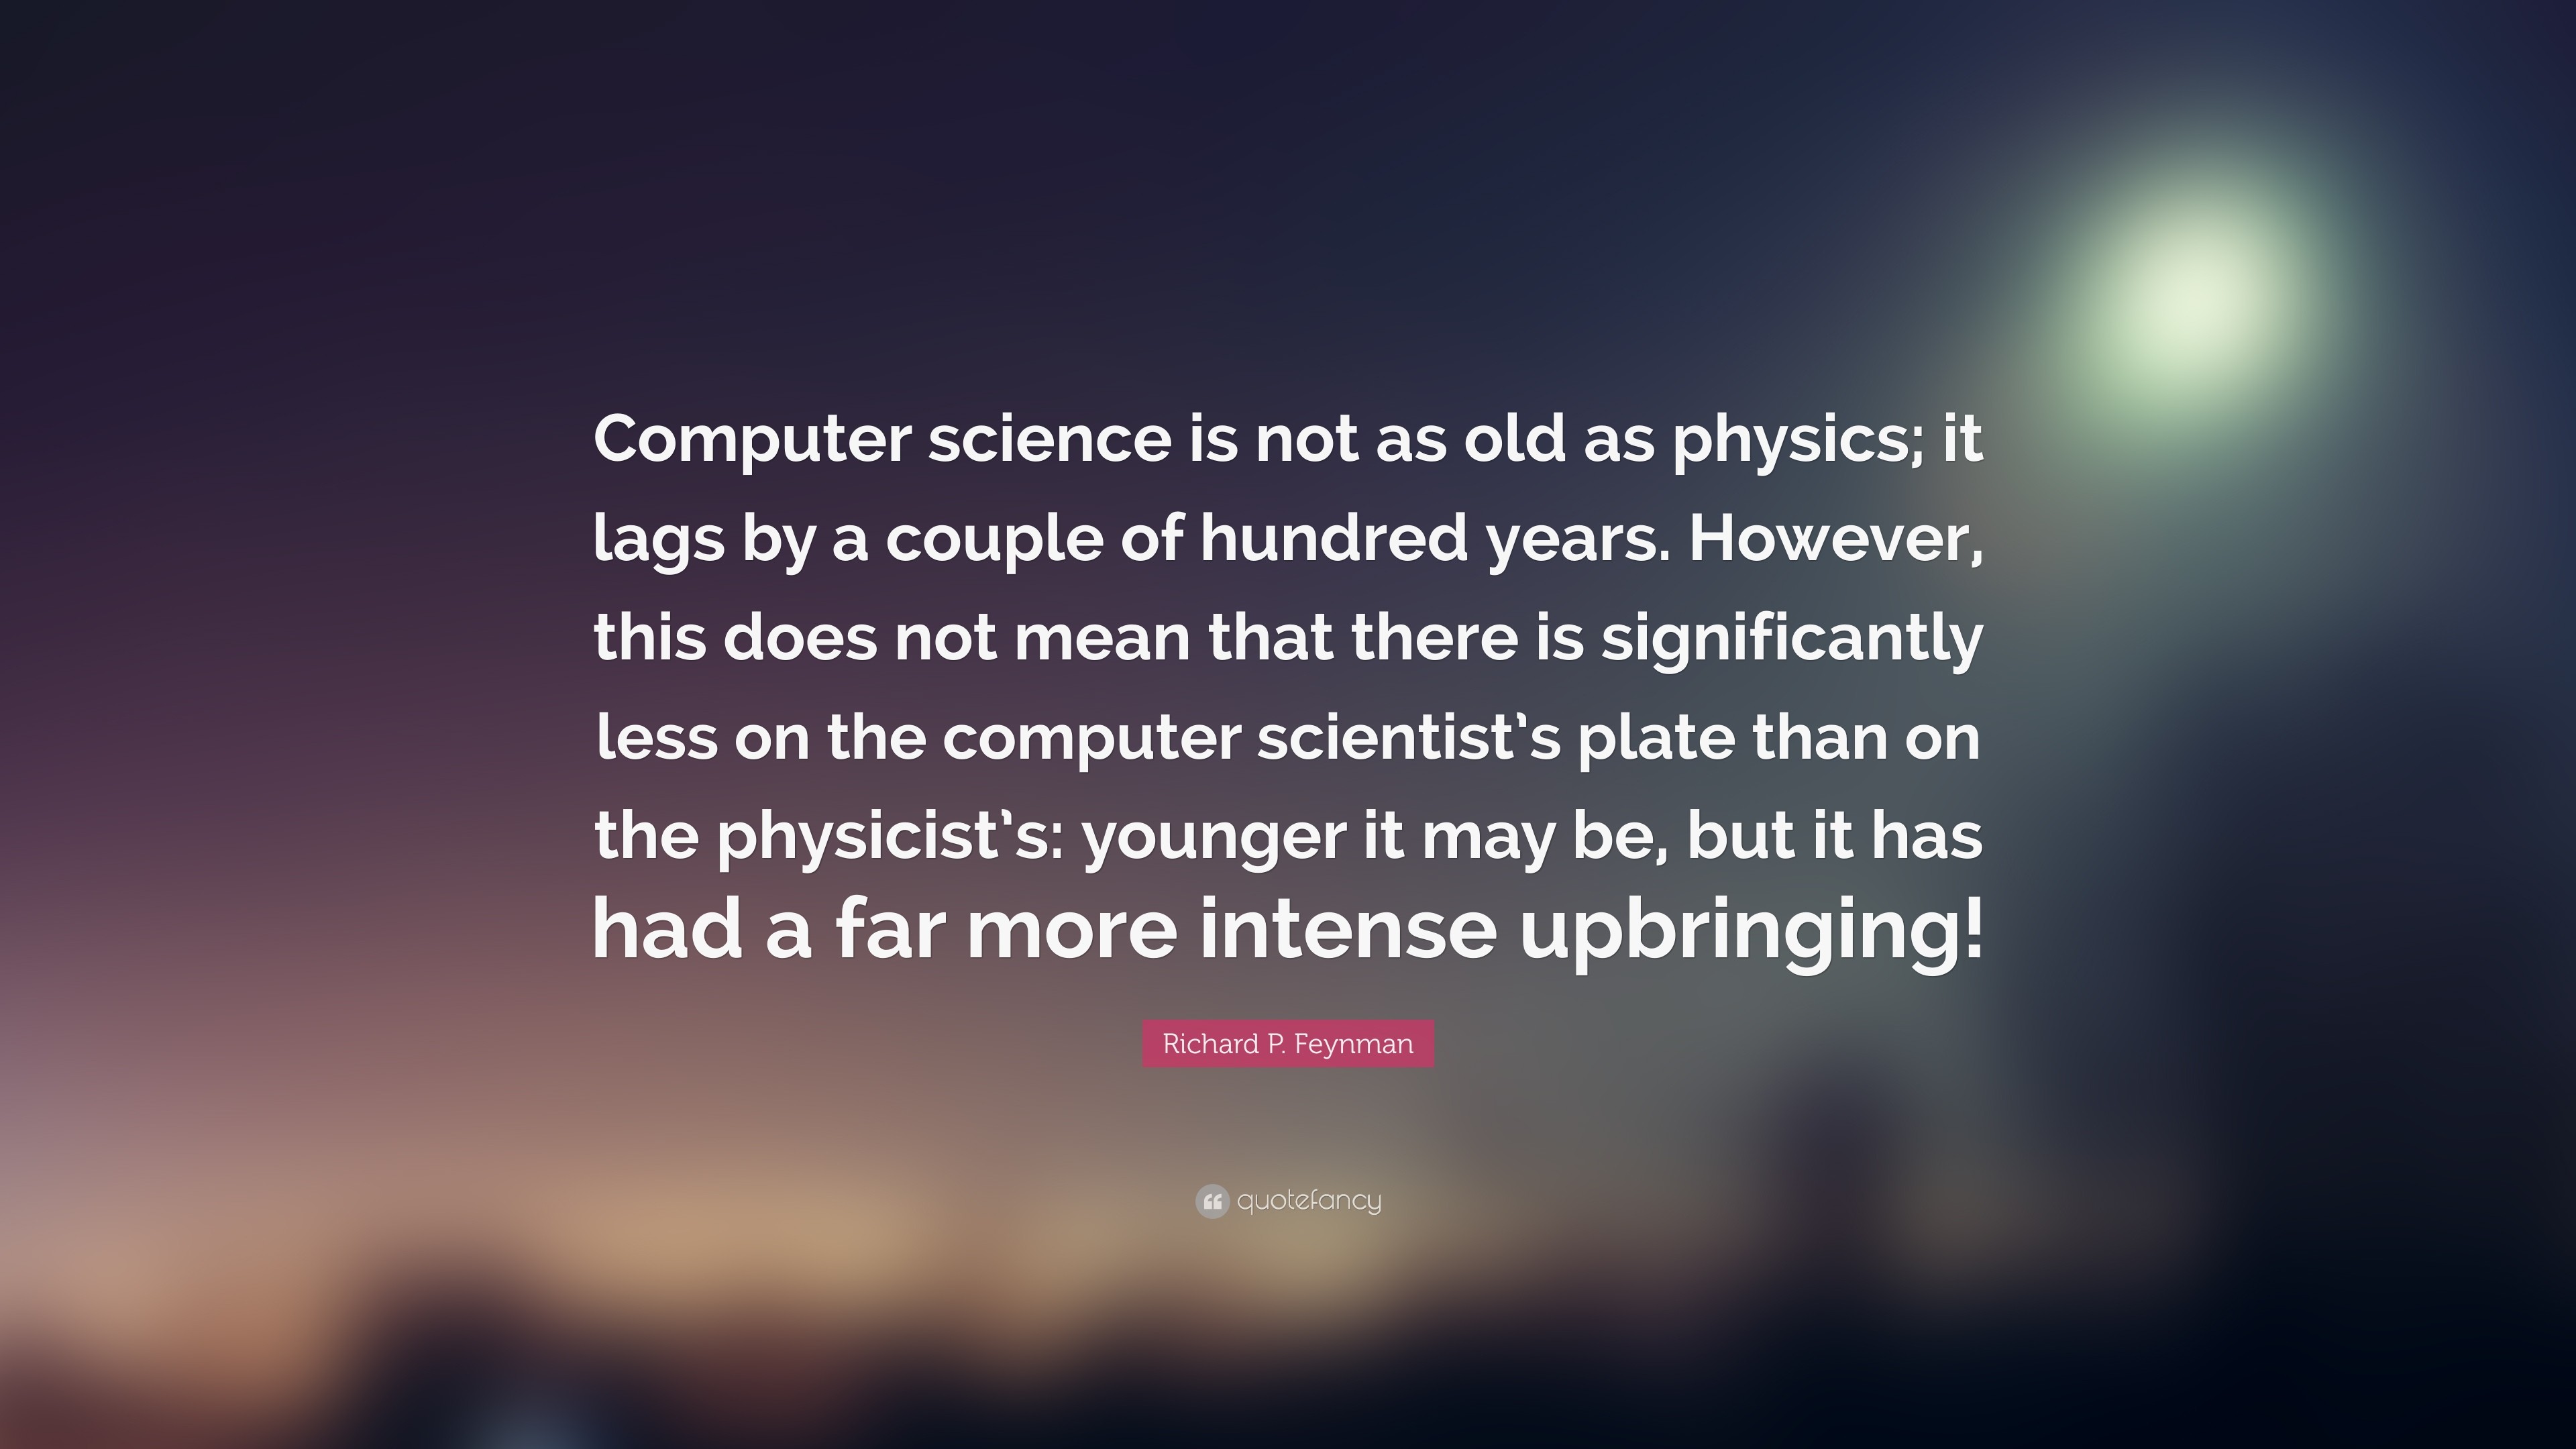 3840x2160 Richard P. Feynman Quote: “Computer science is not as old as physics;